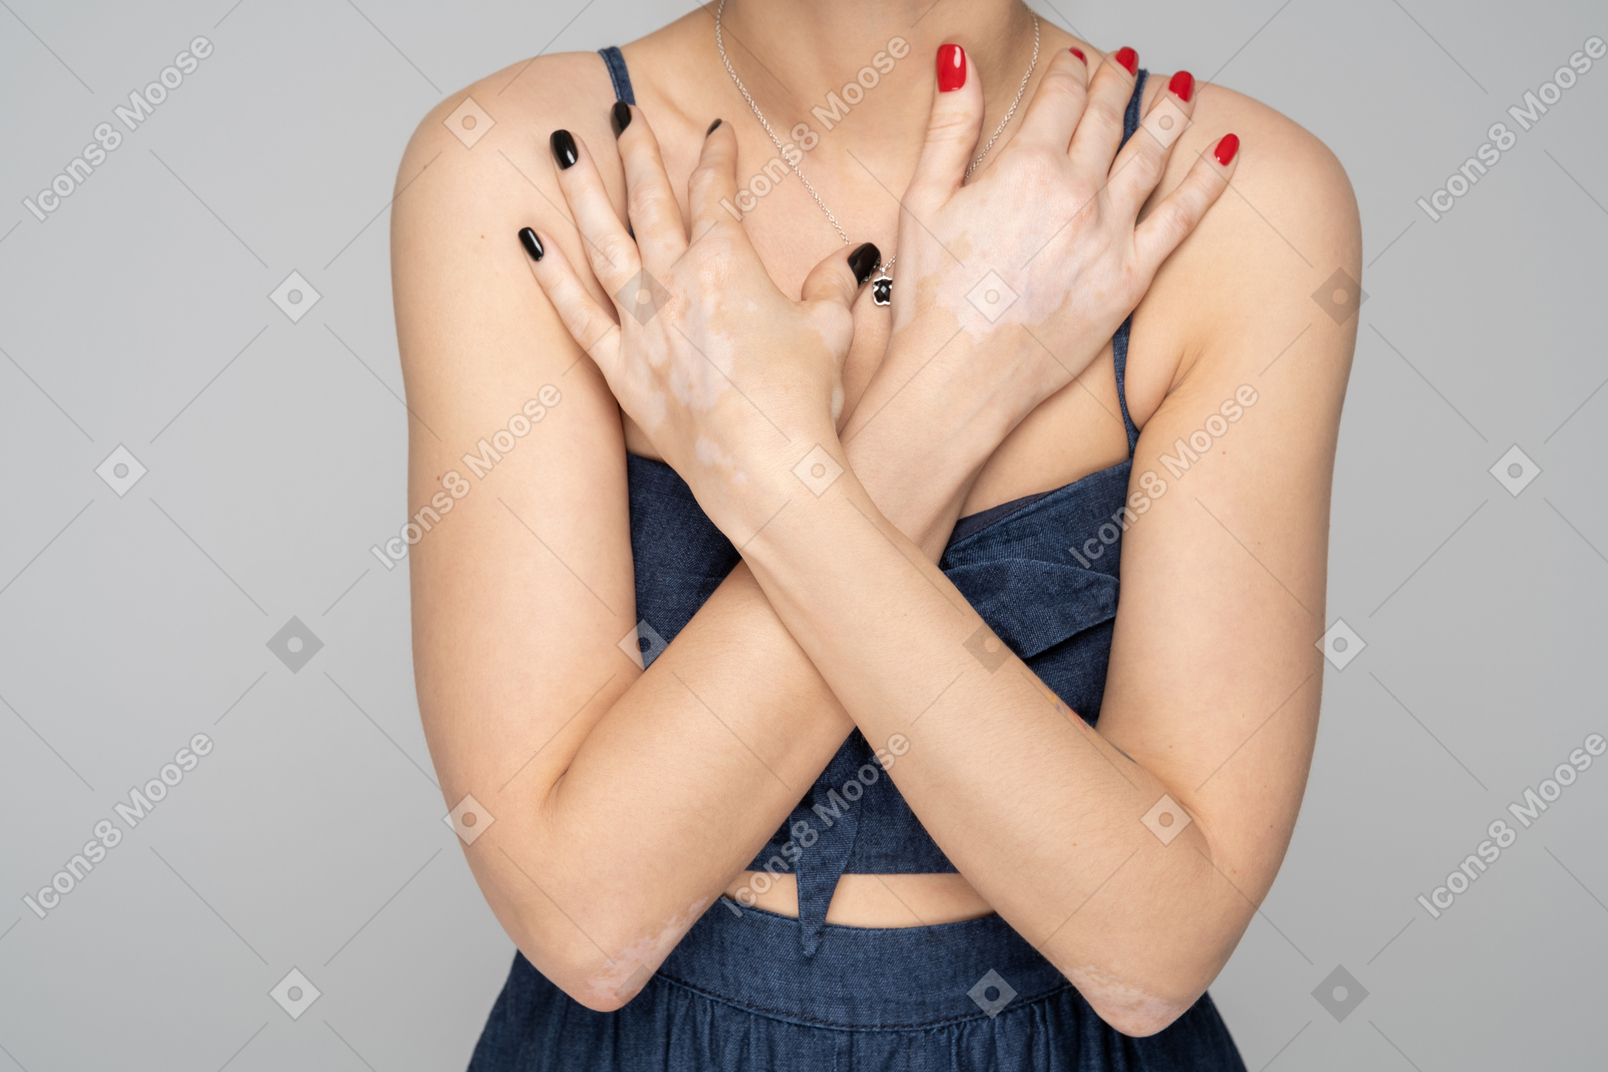 Female with vitiligo disease crossing hands on her chest